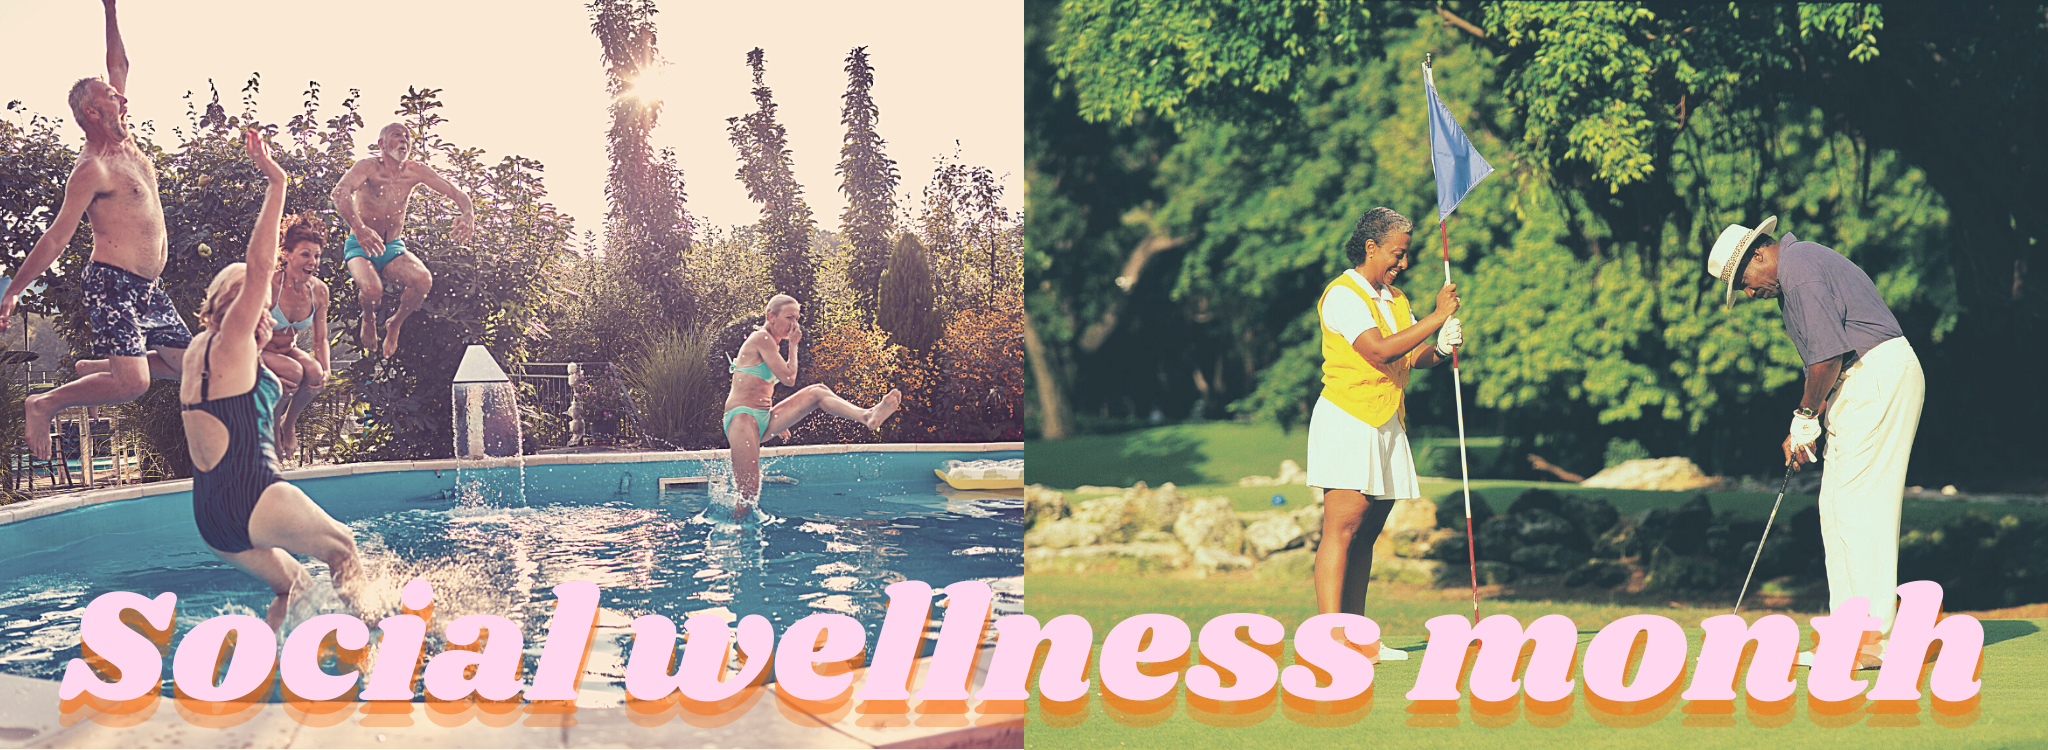 banner image with two pictures - one of older adults jumping in a pool and the other picture with a couple playing golf